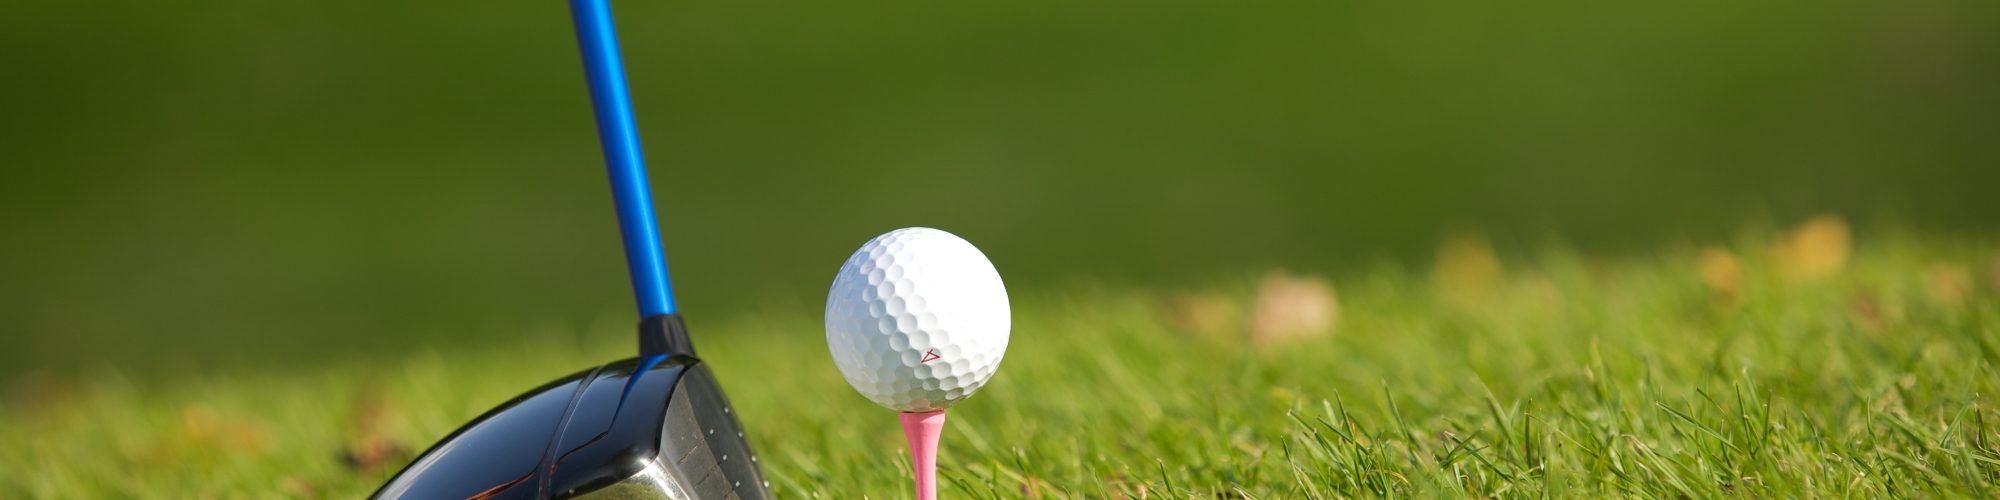 golf club and golf ball in grass for golf tournament